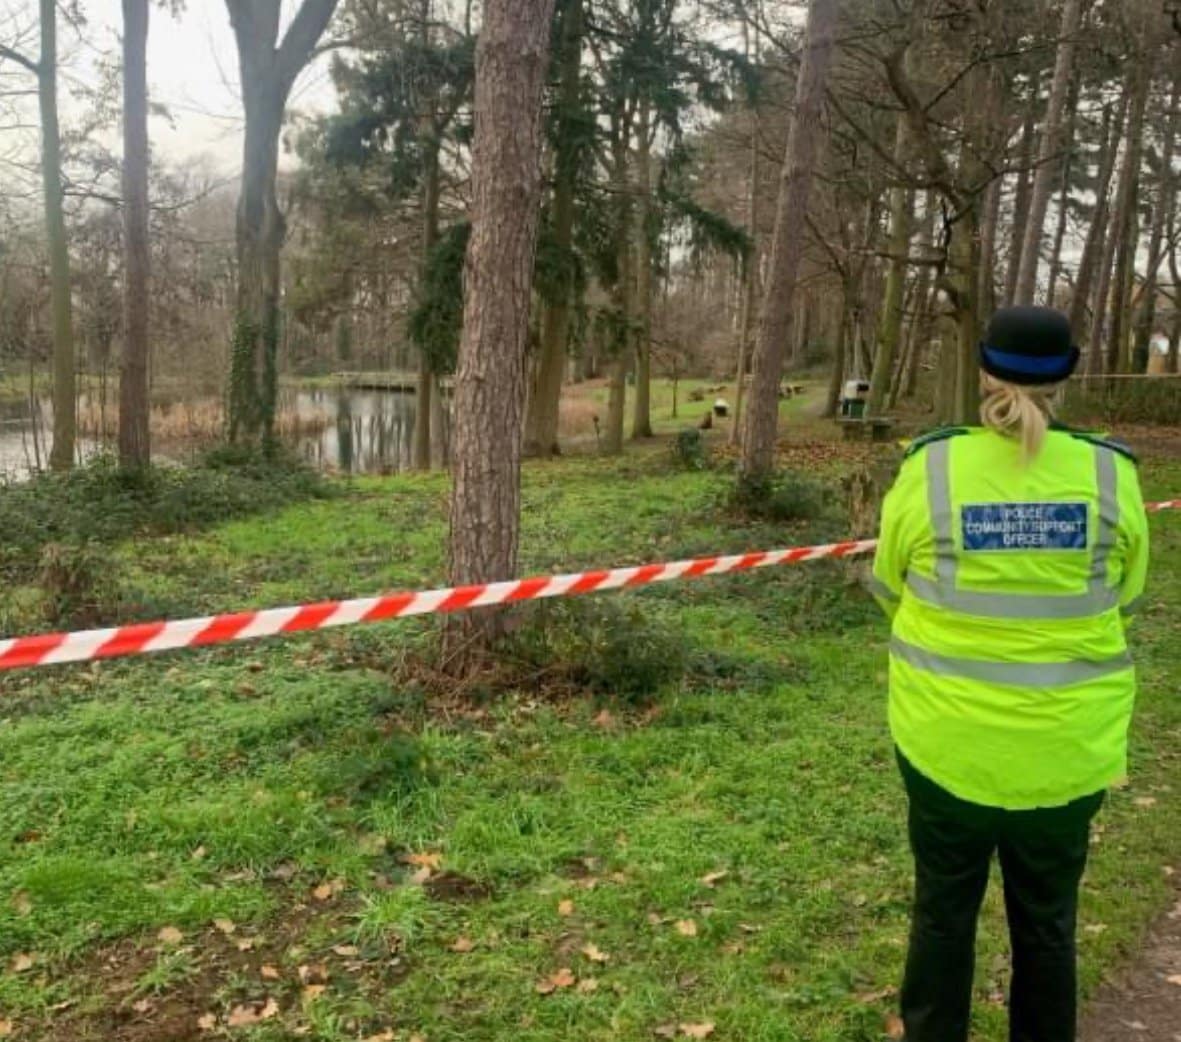 An Investigation Has Been Launched After Human Remains Were Found At Oakwood Pond In Harlow On Saturday